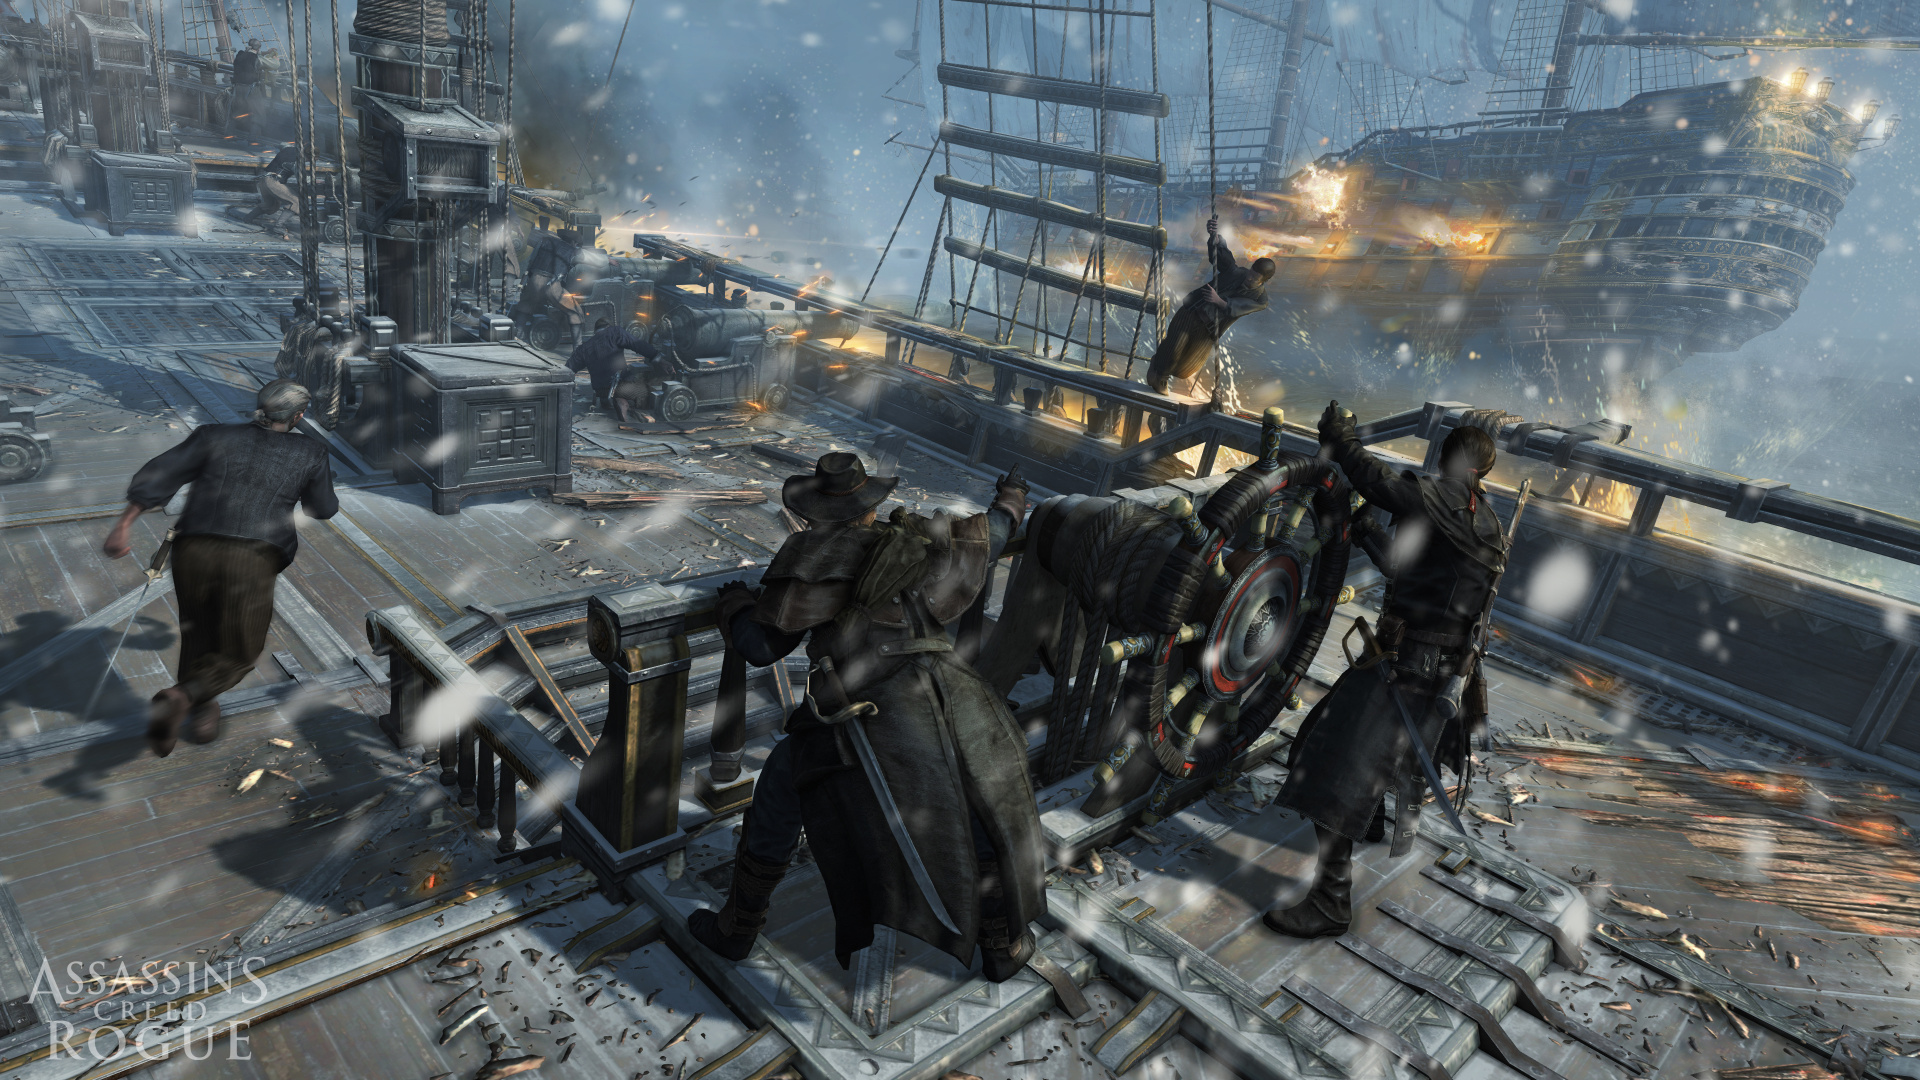 Review Assassin's Creed: Rogue